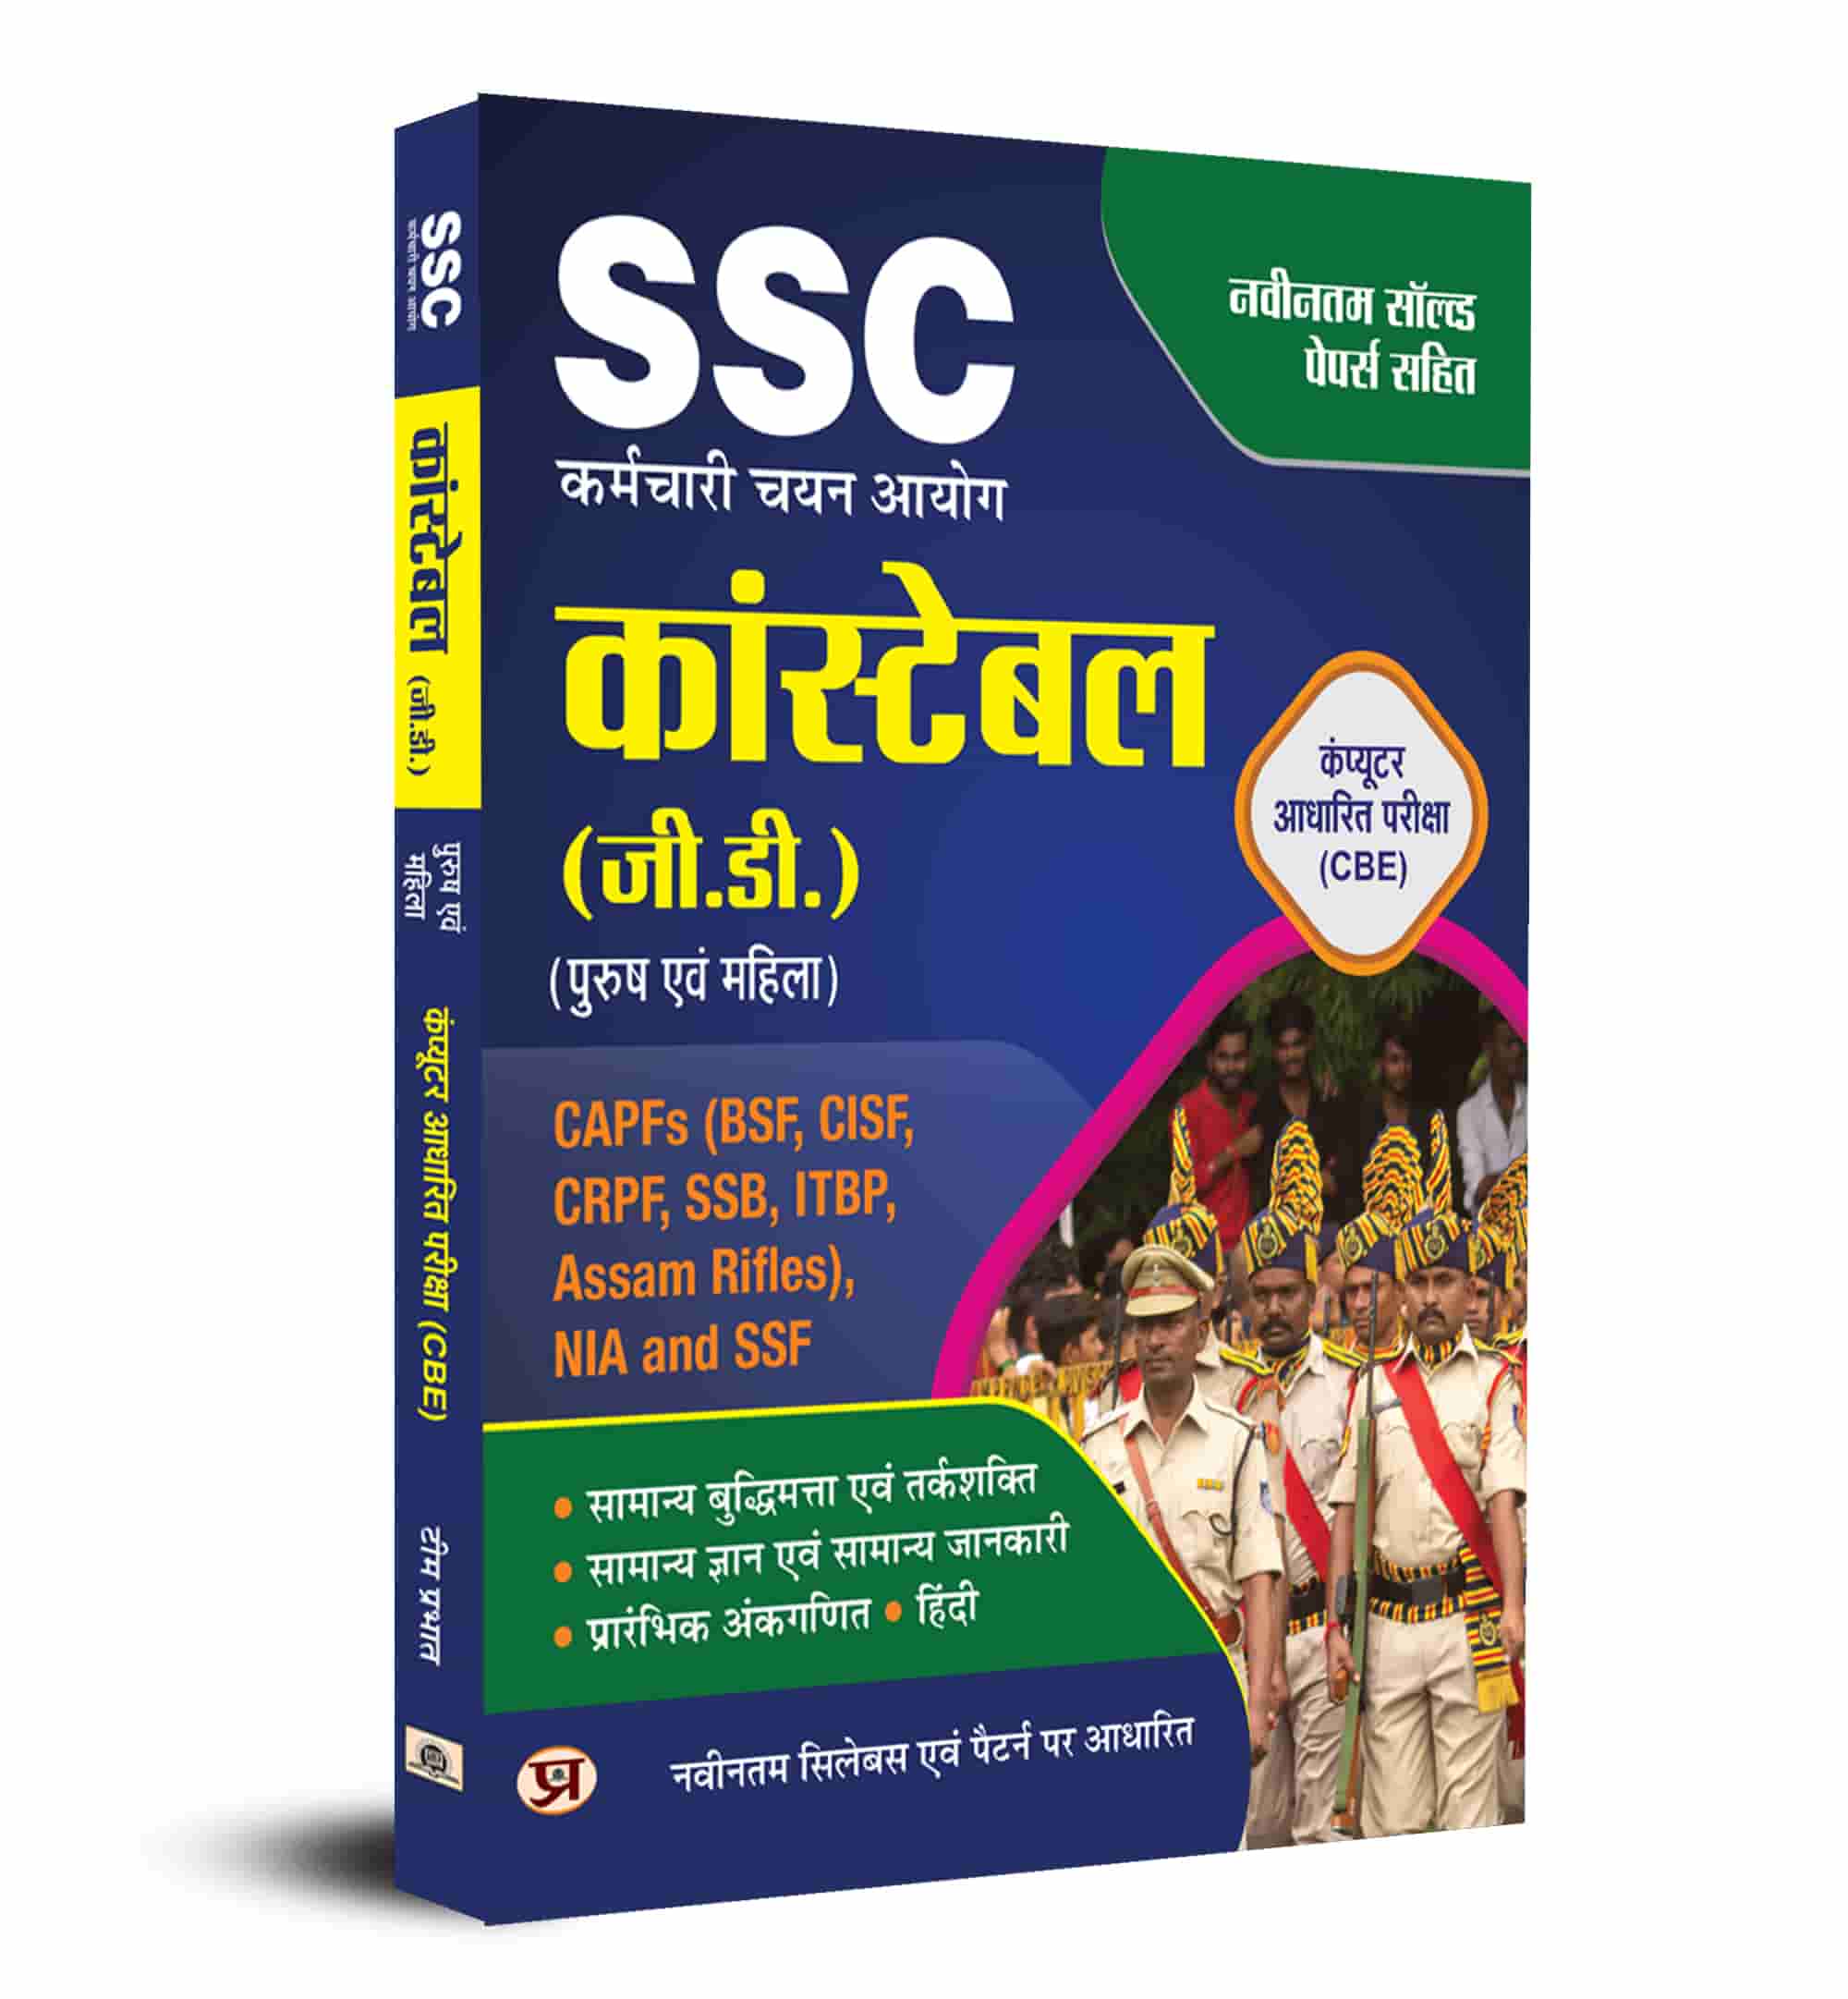 SSC GD Constable Computer Based Examination (CBE) Complete Study Guide for CAPFs (BSF, CISF, CRPF, SSB, ITBP, Assam Rifles, NIA, SSF Book in Hindi